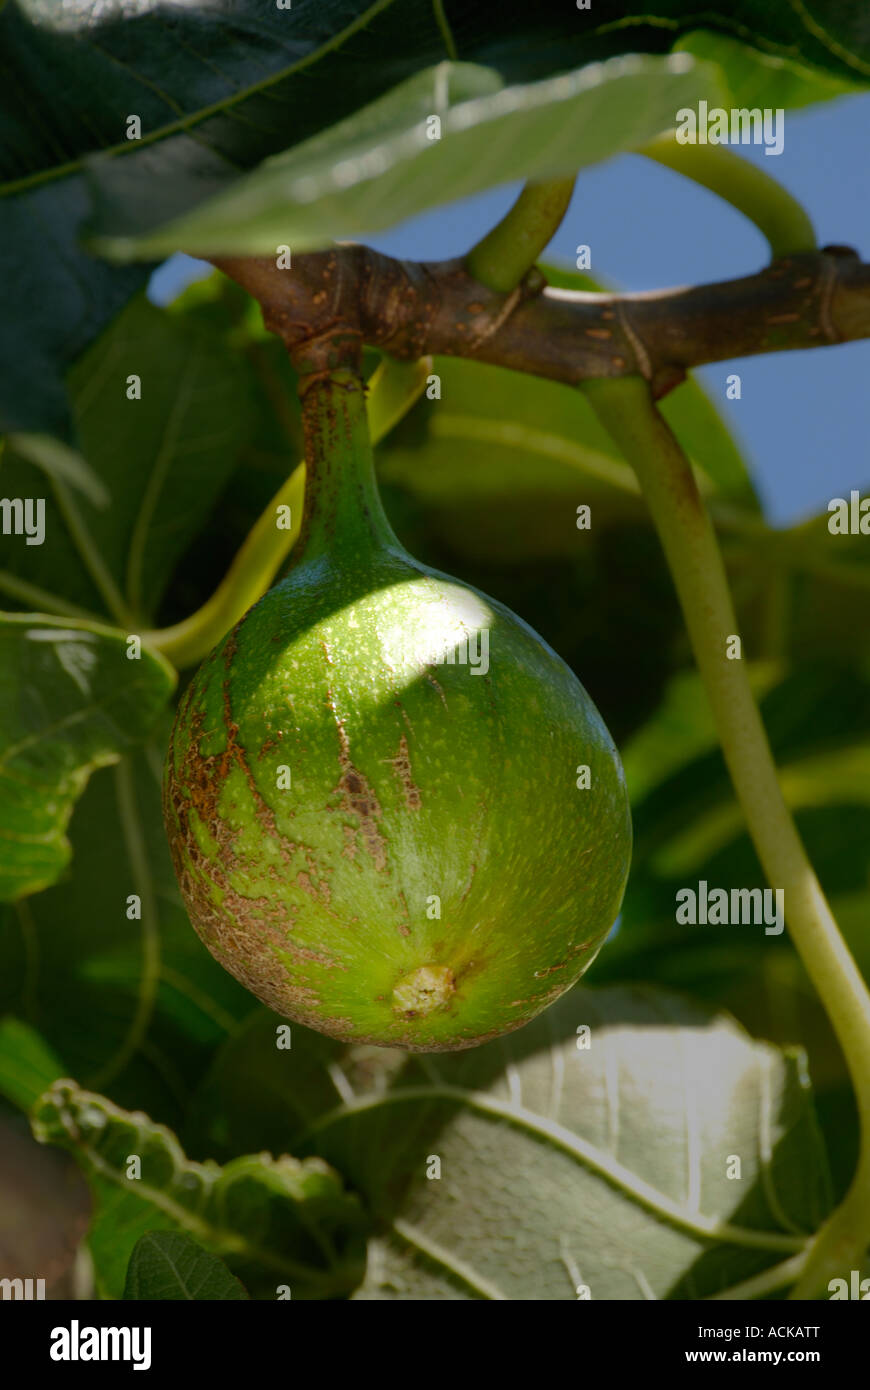 Latin, Ficus carica. Common, Common Fig Tree, Brown Turkey Fig. A nearly ripened fig on the tree Stock Photo